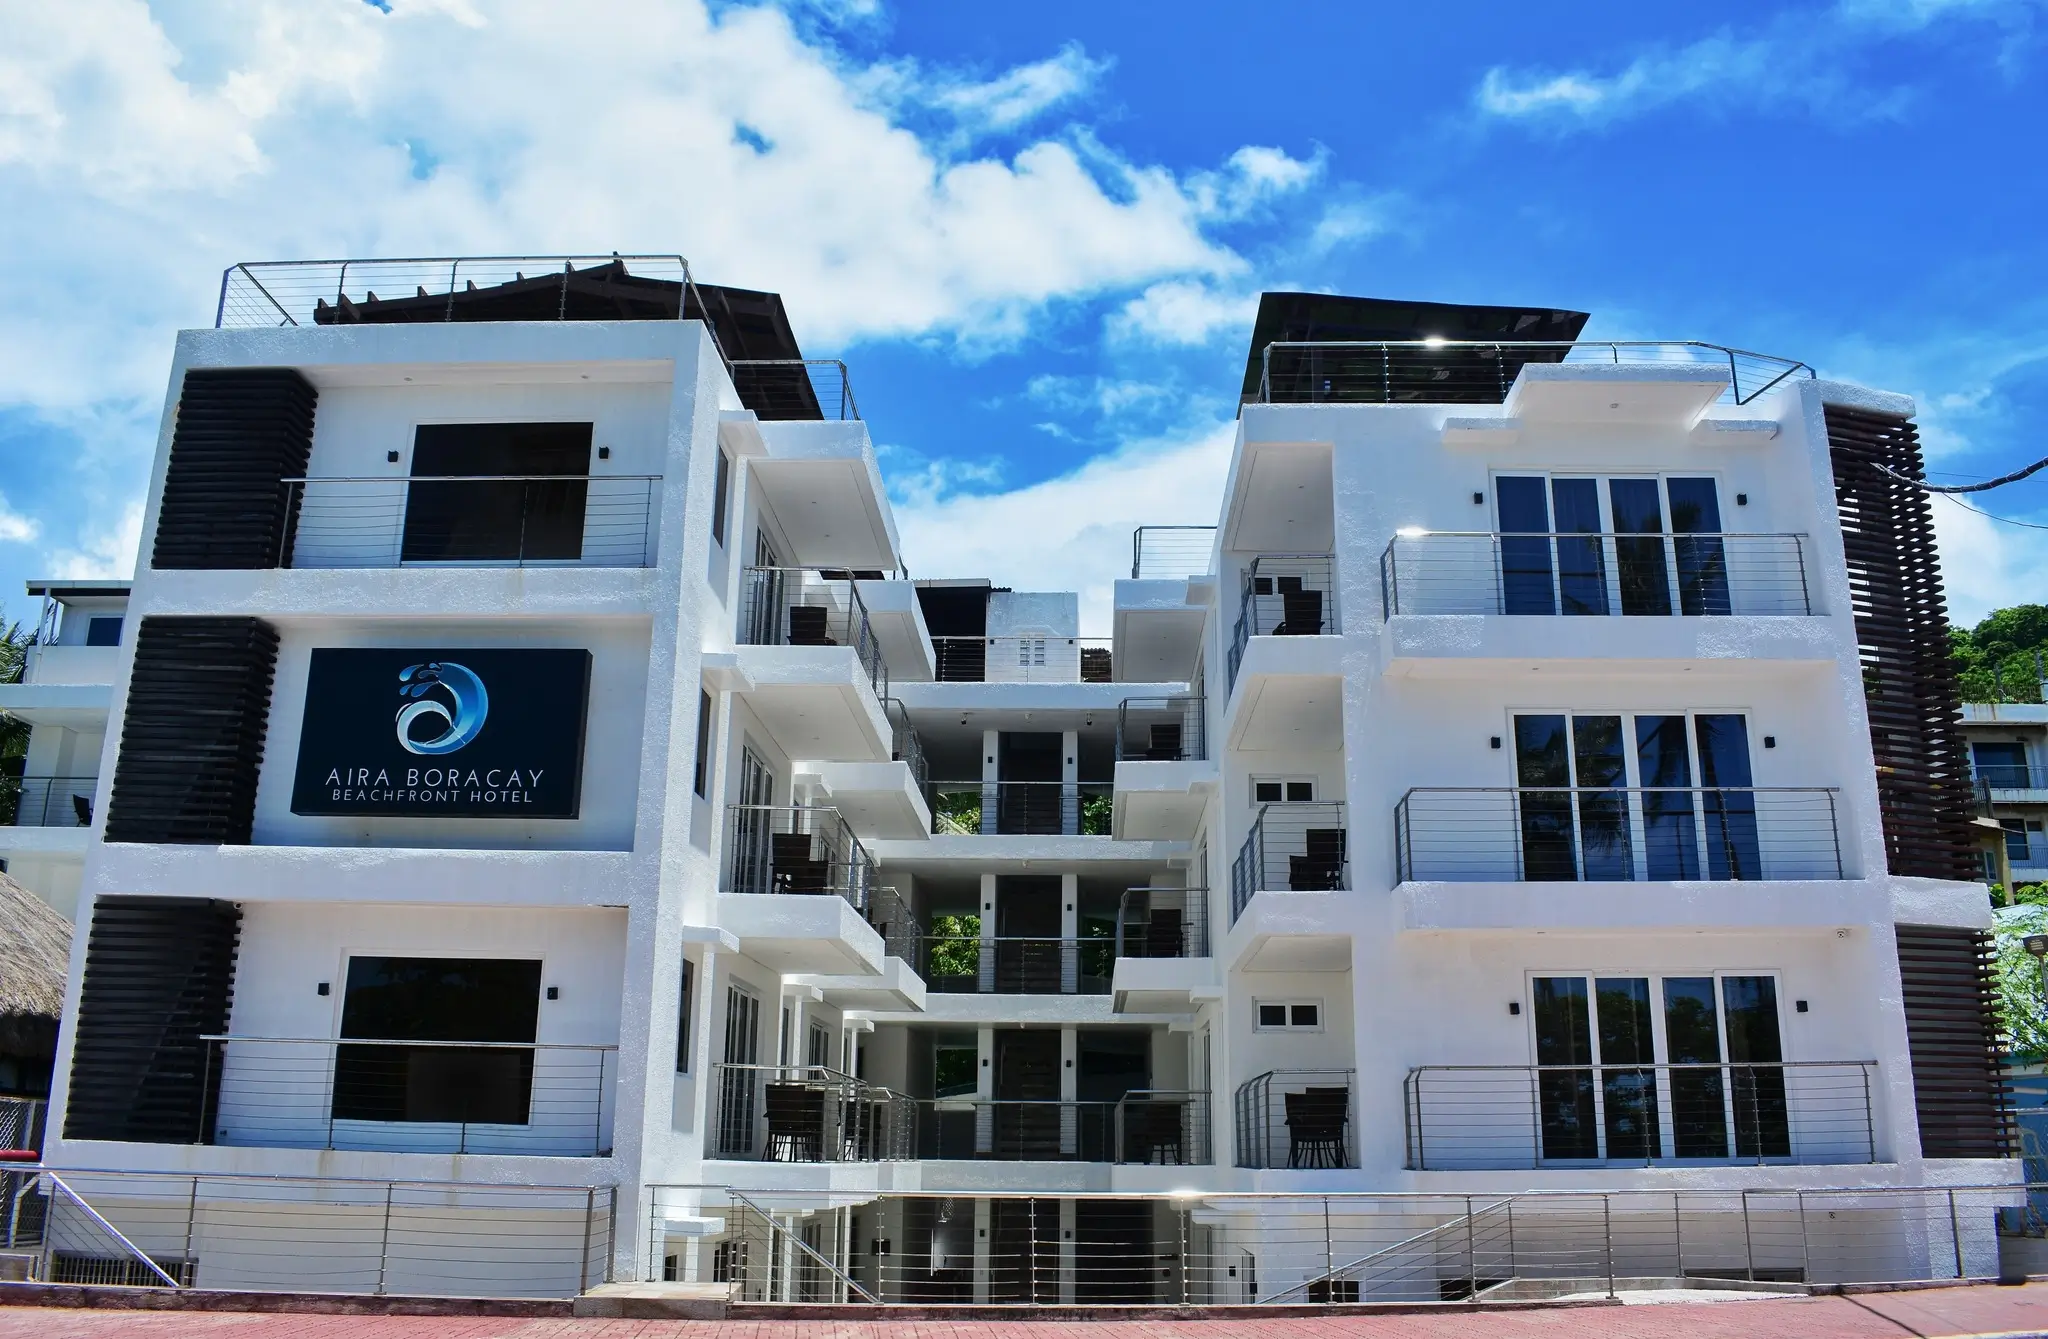 Exterior view of Aira Boracay, a boutique resort in Boracay, featuring a modern white facade with multiple balconies and sharp architectural lines. The building stands prominently against a bright sky, reflecting a contemporary beachfront aesthetic.